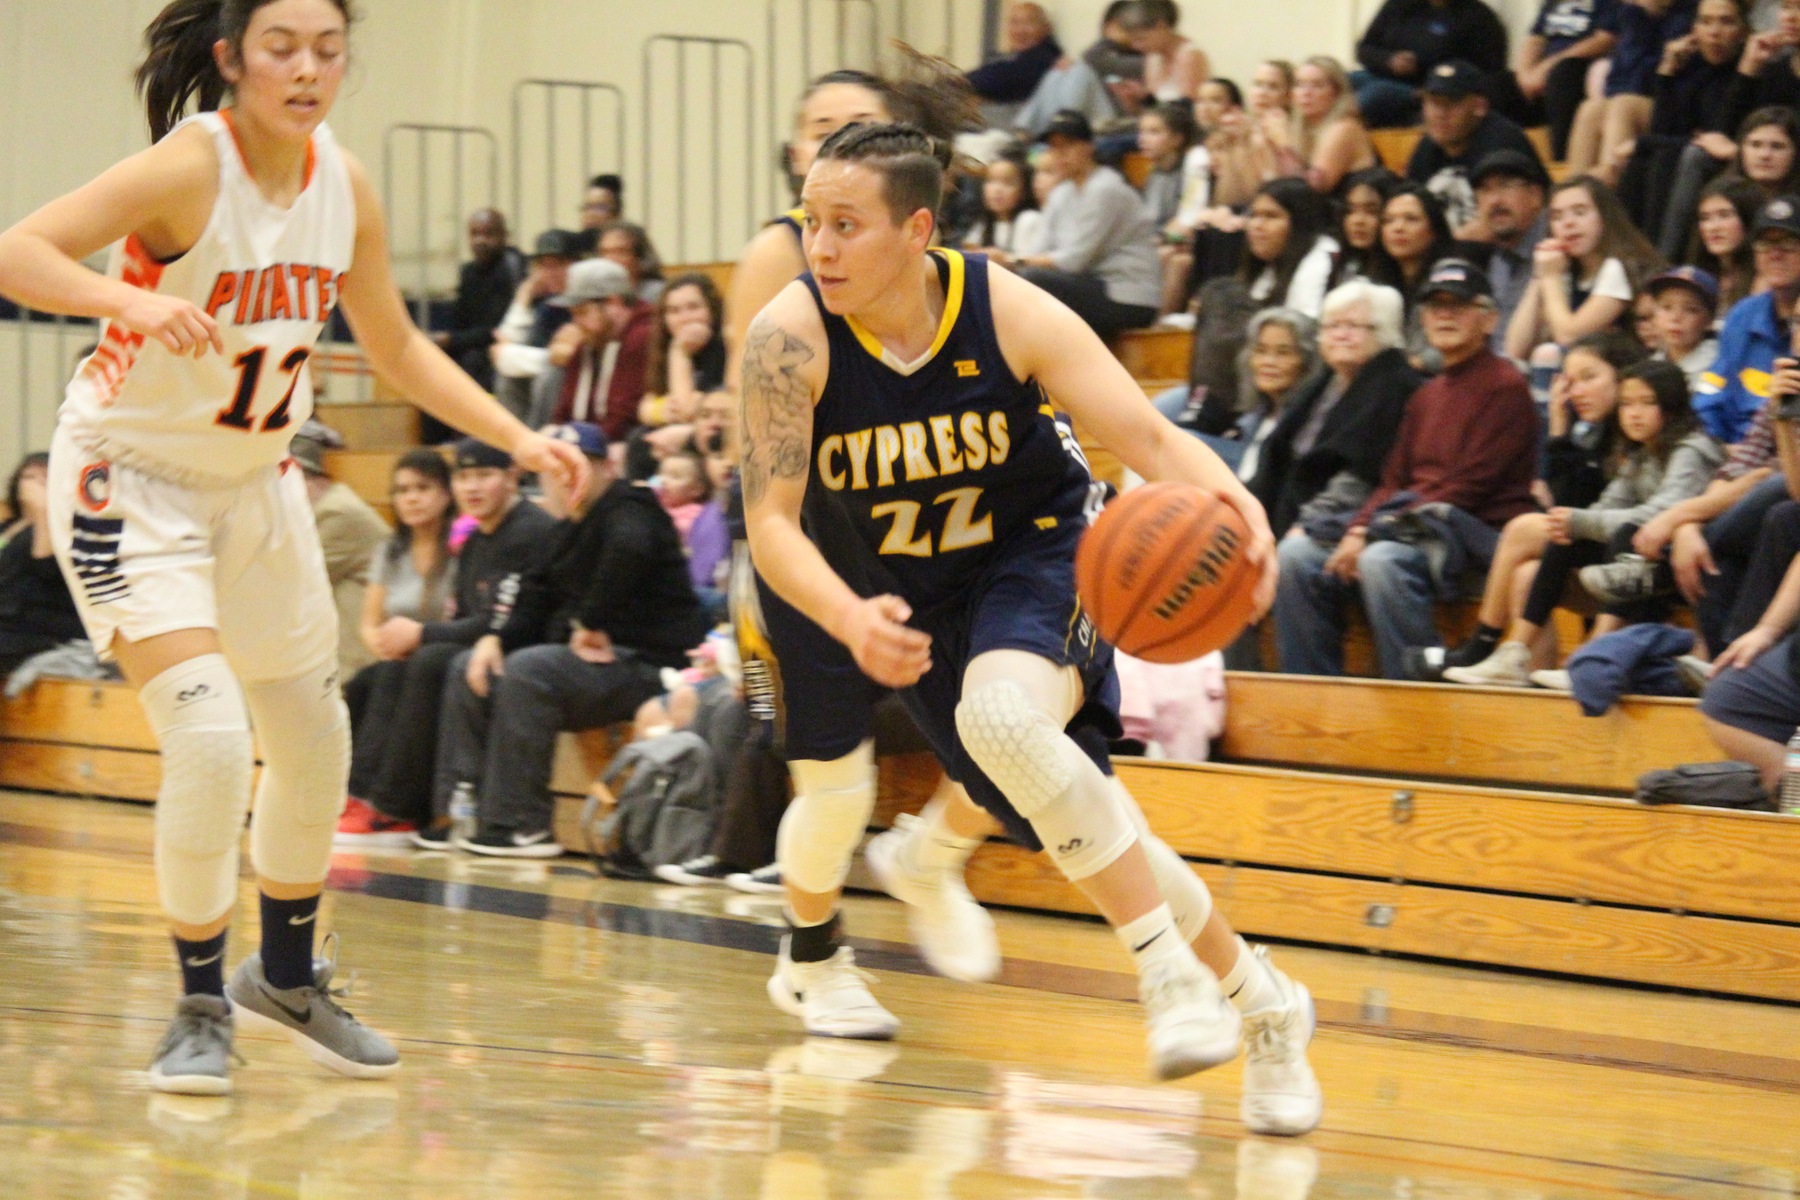 Lady Chargers Cruise Past Pirates, 72-51